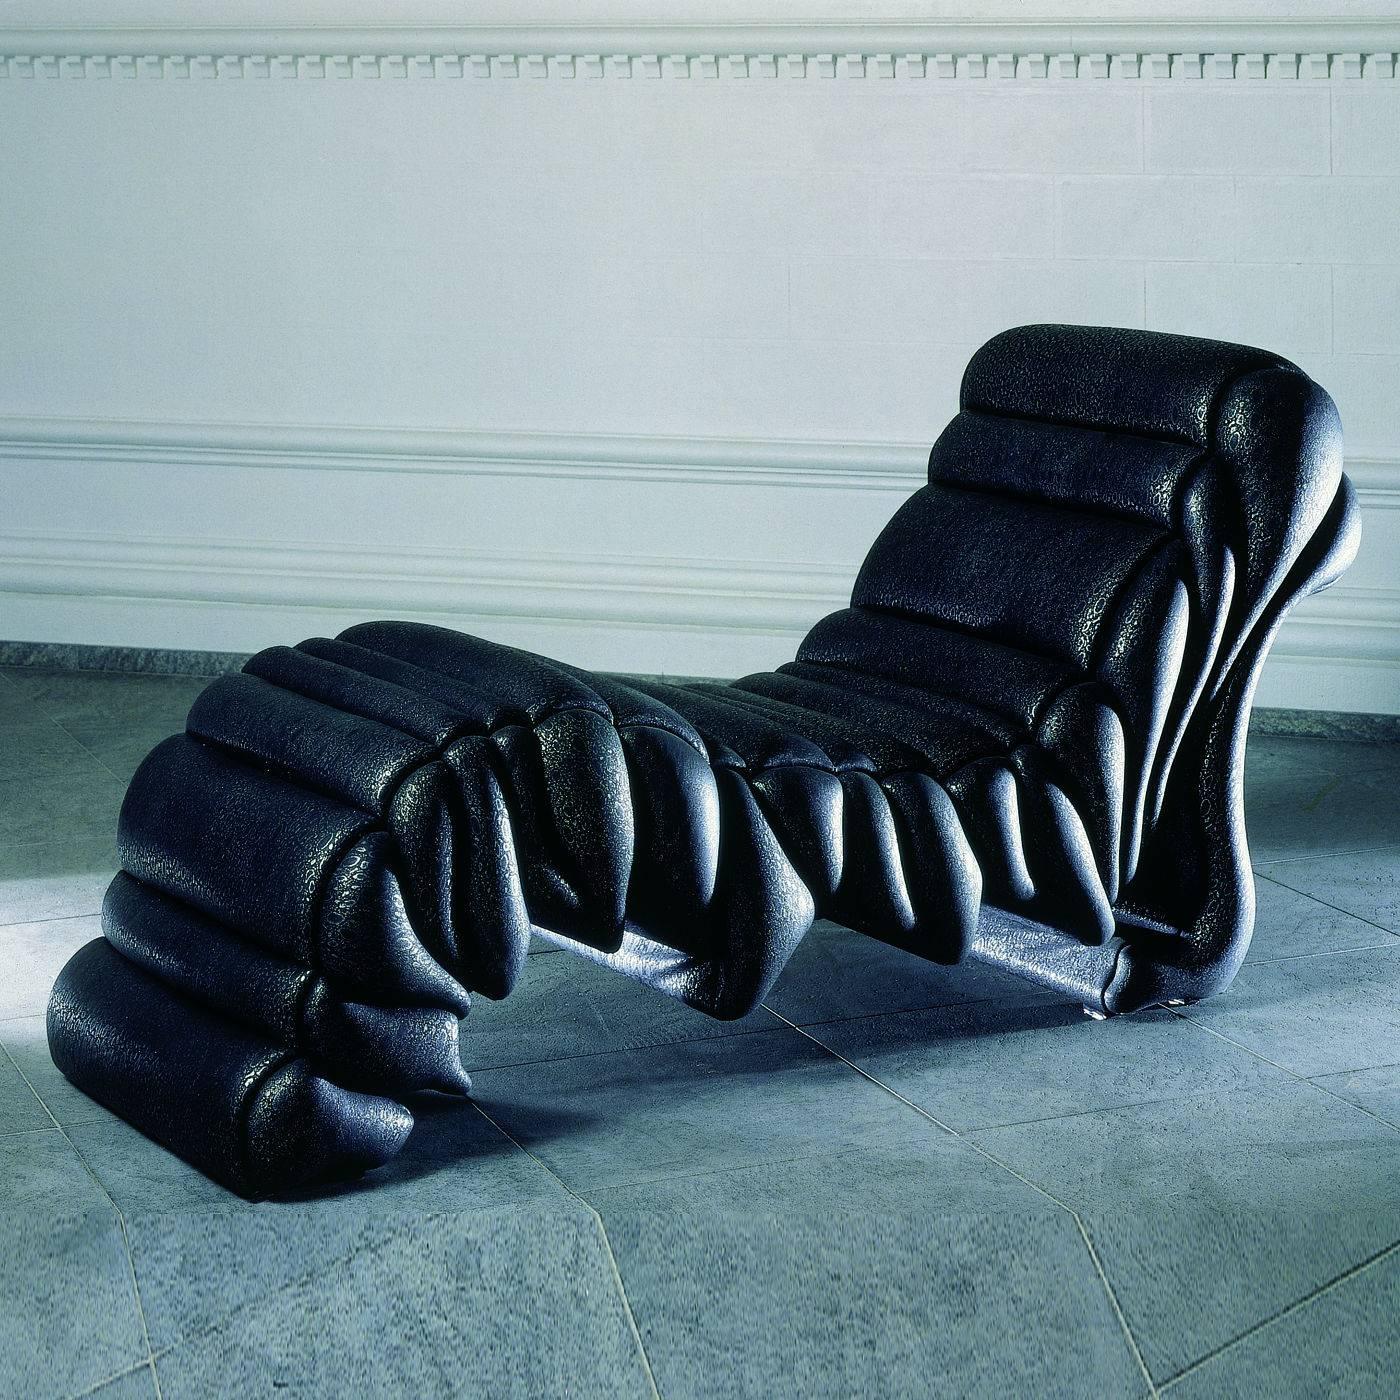 This striking work of art that is also a functional furniture piece was designed by Roberto Fallani to resemble the powerful lava slowly pouring on a hilly surface. The wooden structure supports a series of foam pillows covered by a dark-colored